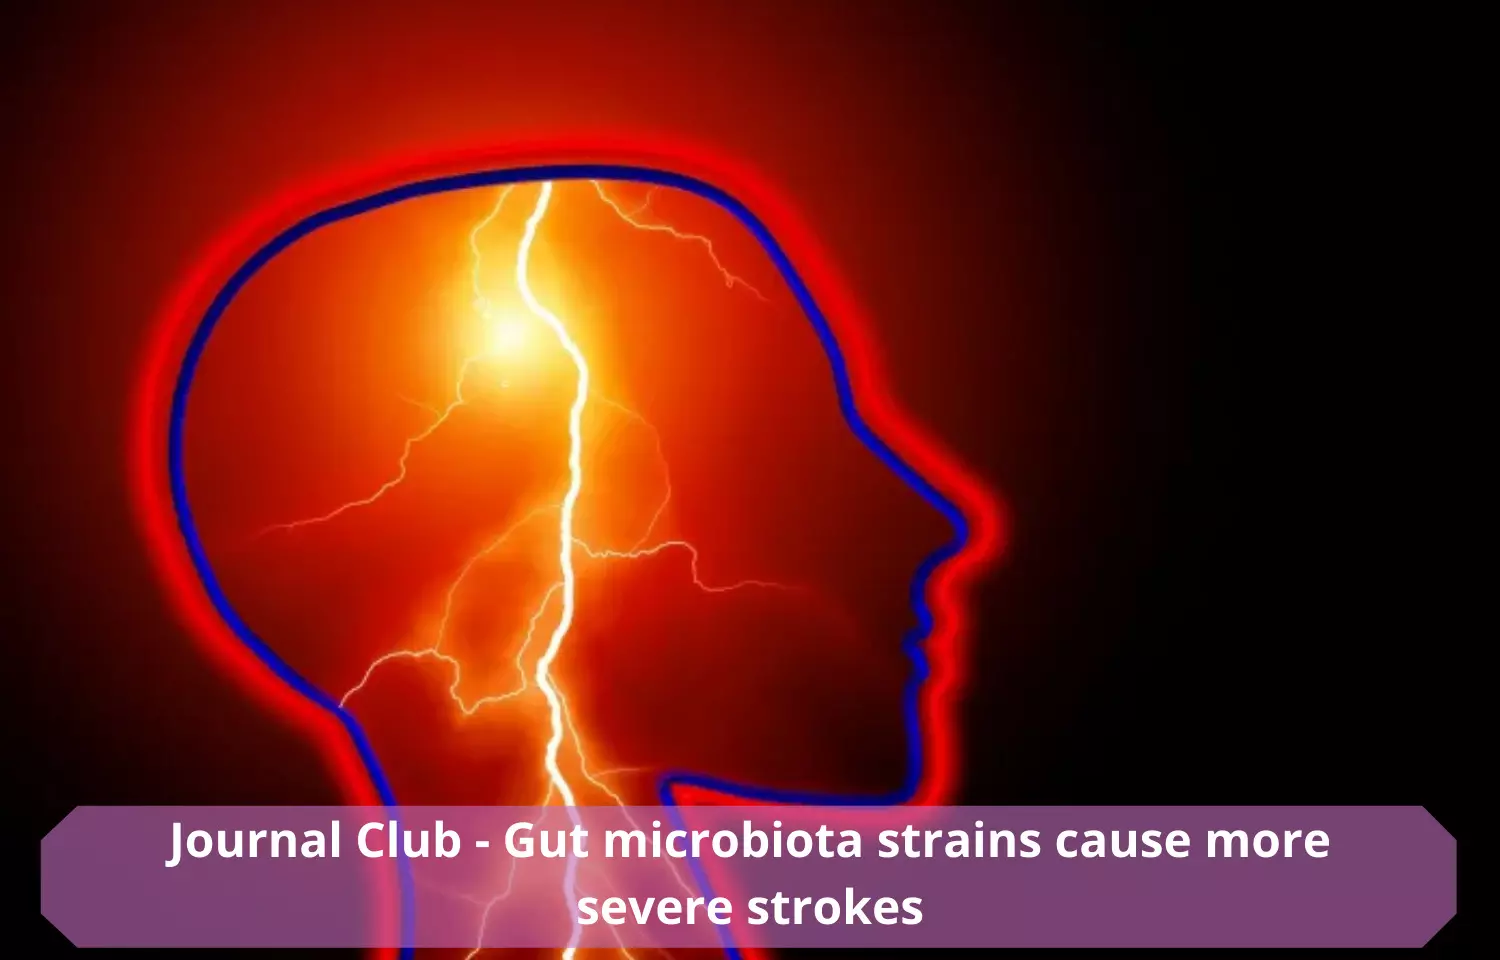 Journal Club - Gut microbiota strains to cause more severe strokes